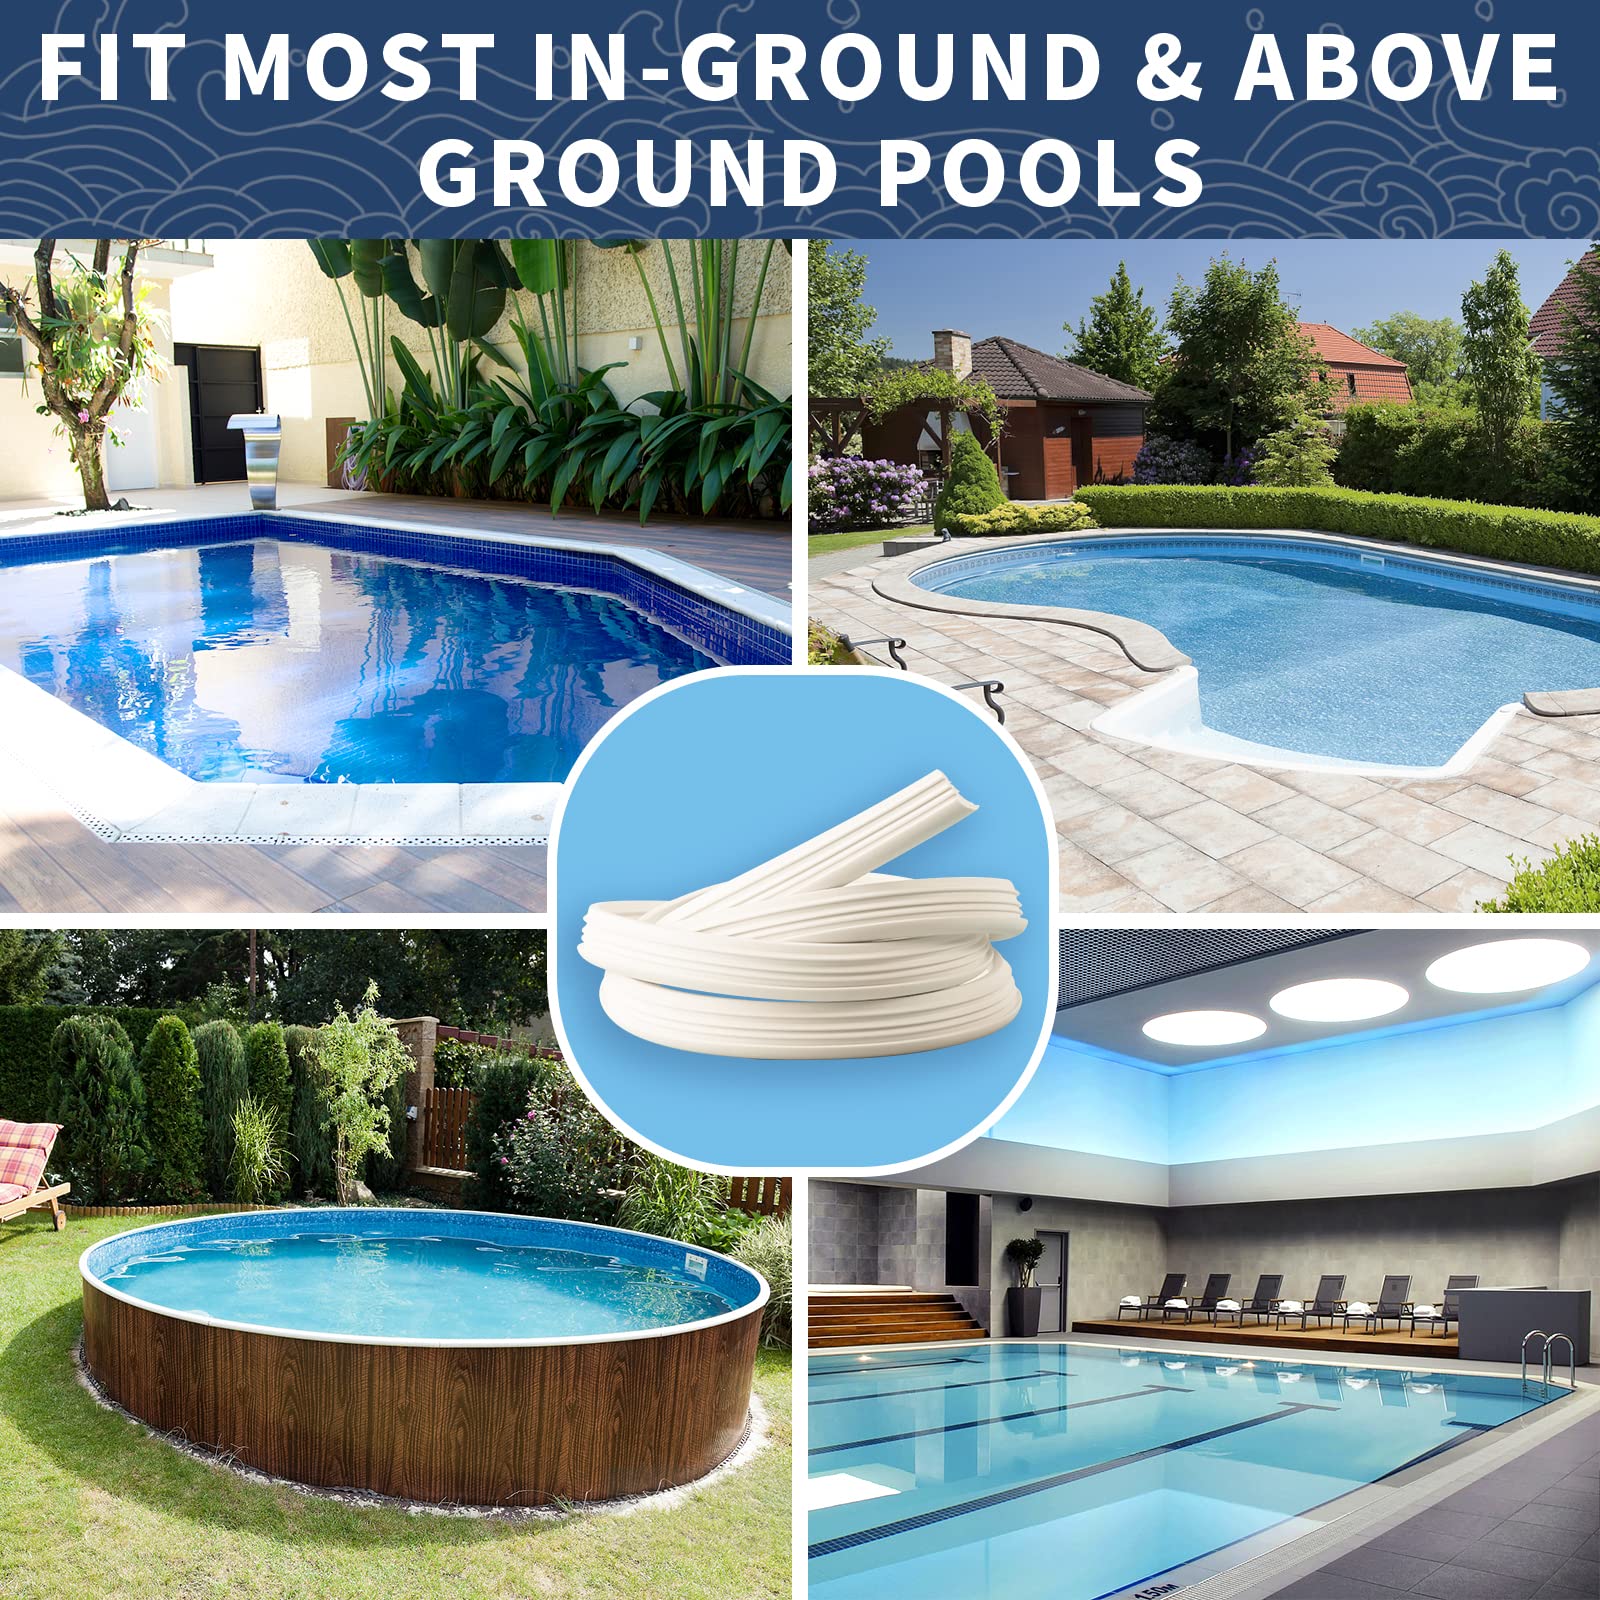 Swimming Pool Liner Locking Strips - 120ft White Pool Bead Wedge Lock Roll, Pliable Plastic Flexible Pool Liner Repair Kit Fit for most Above-Ground & In-Ground Swimming Pool Vinyl Beaded Liners